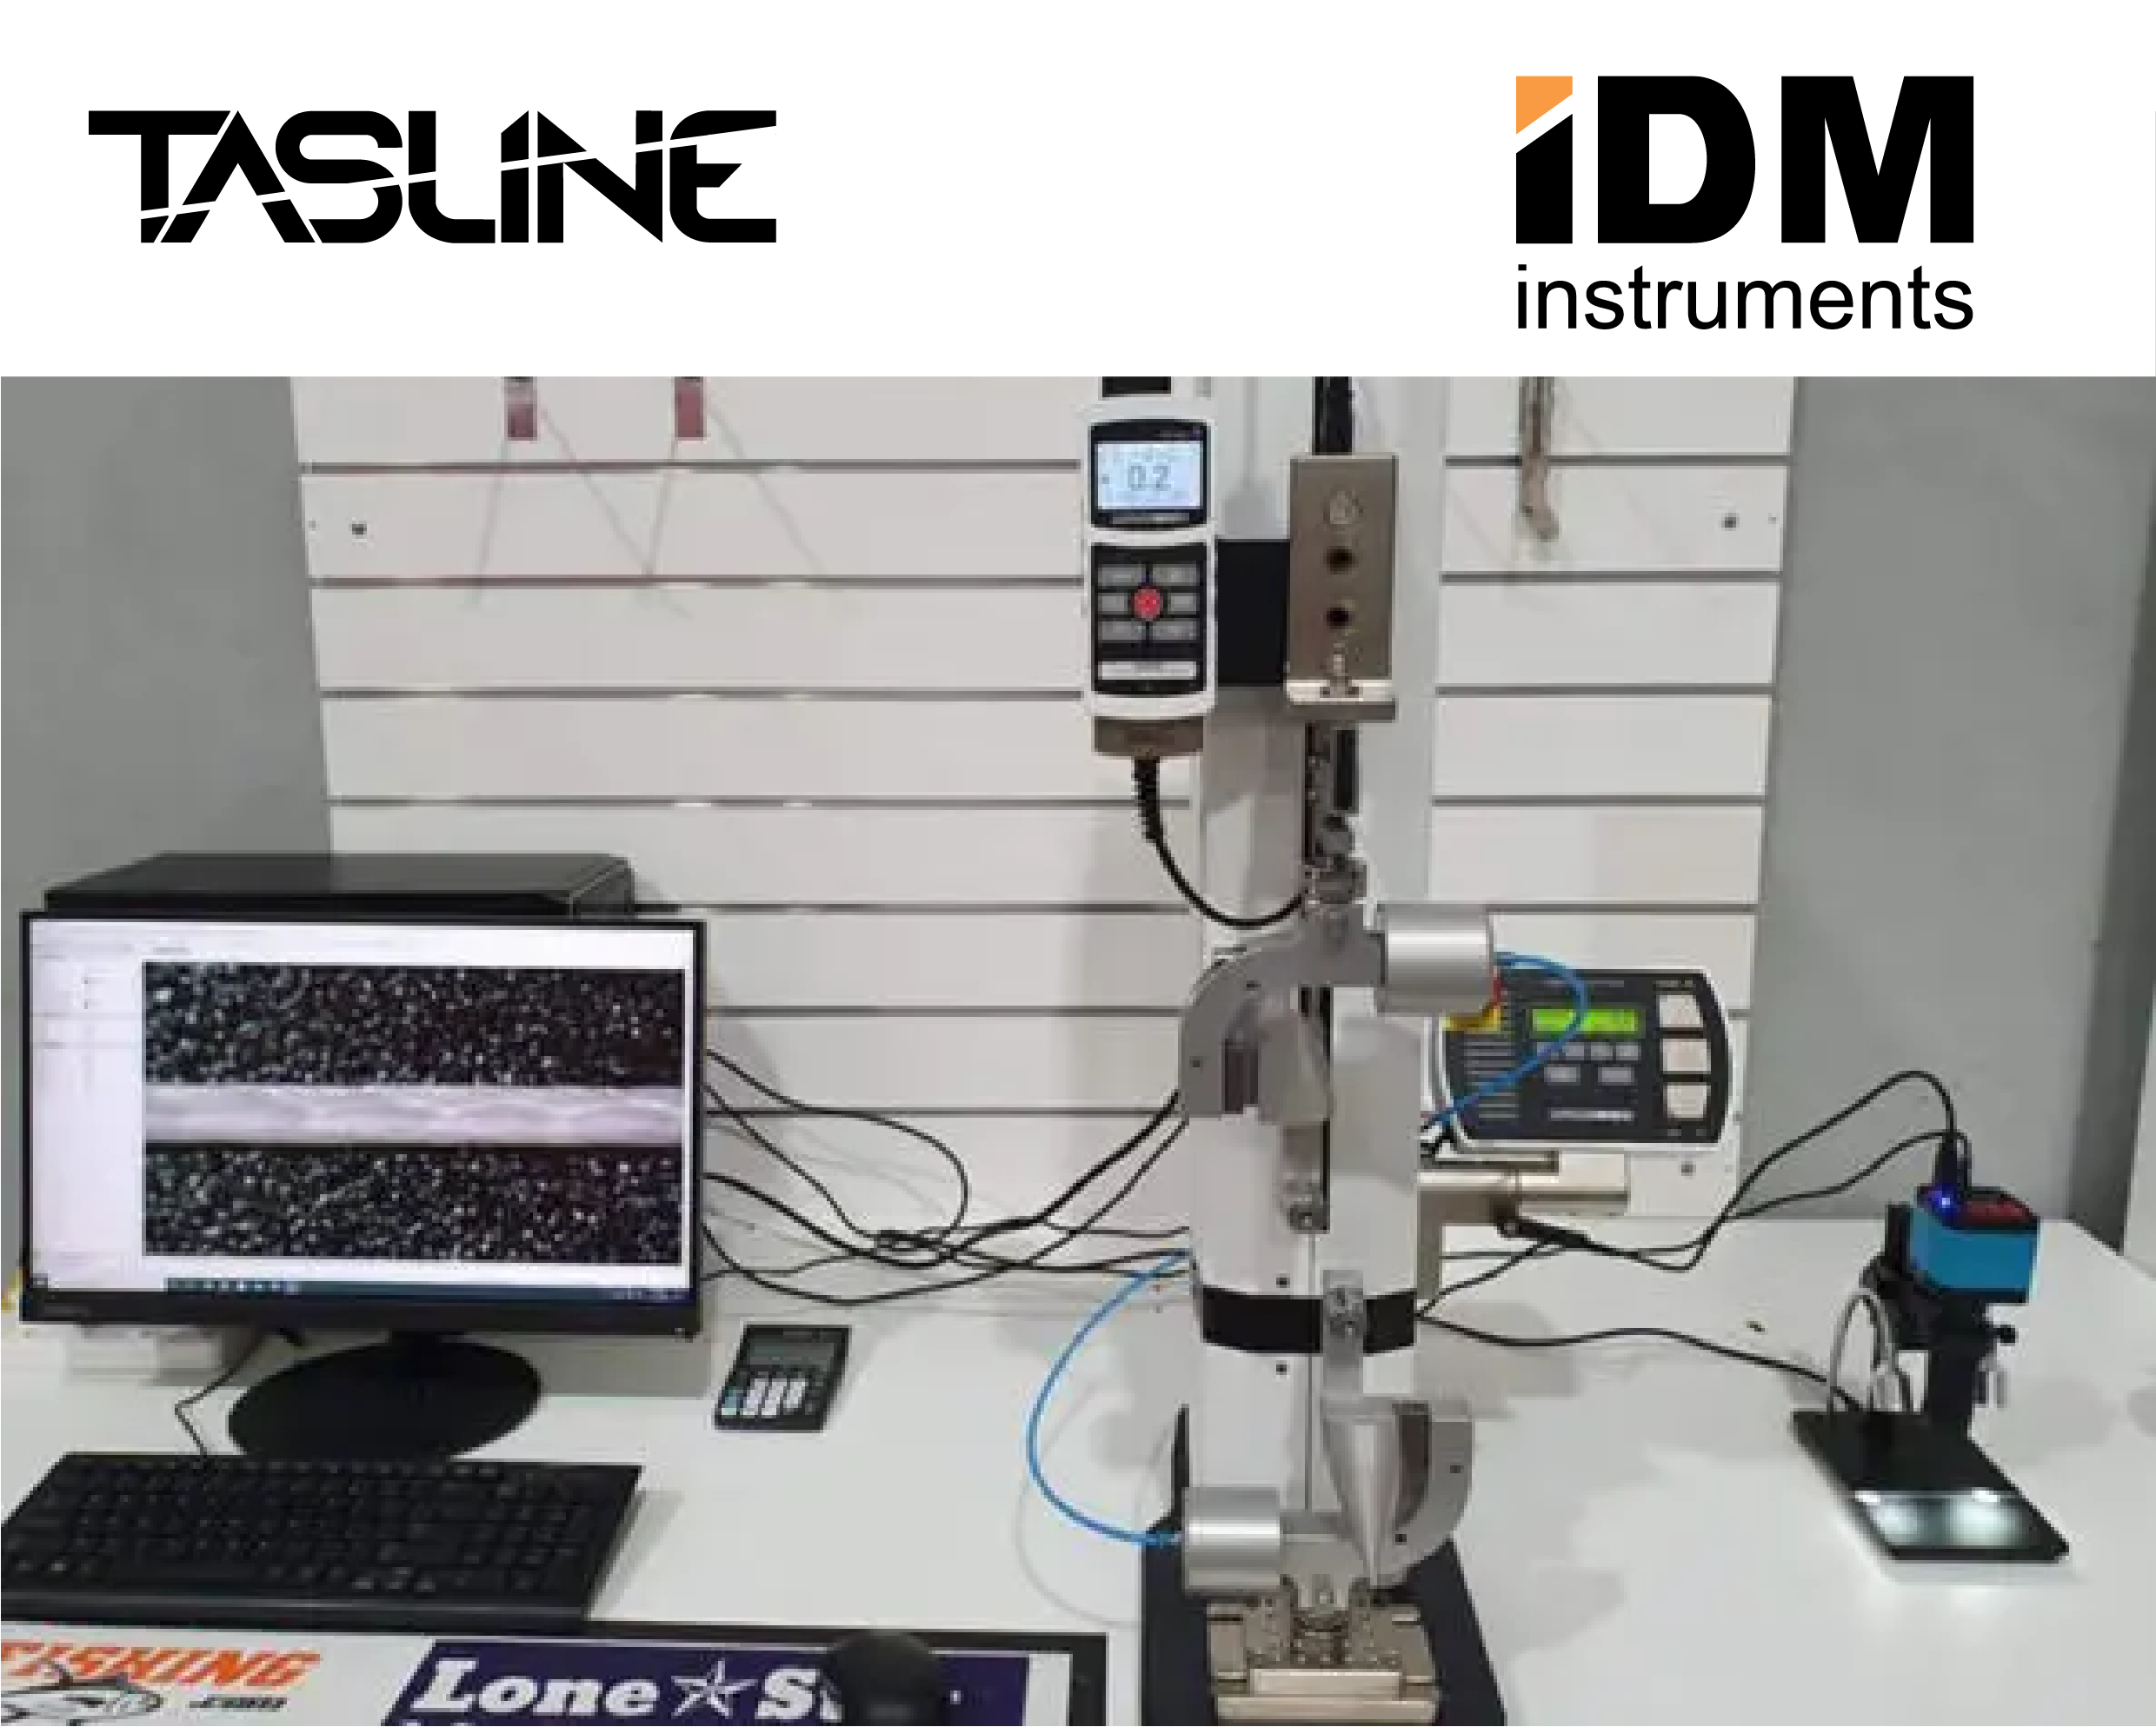 Mark-10 Advanced Force / Torque indicator on a motorised test stand, calibrated and certified by IDM Instruments Australia